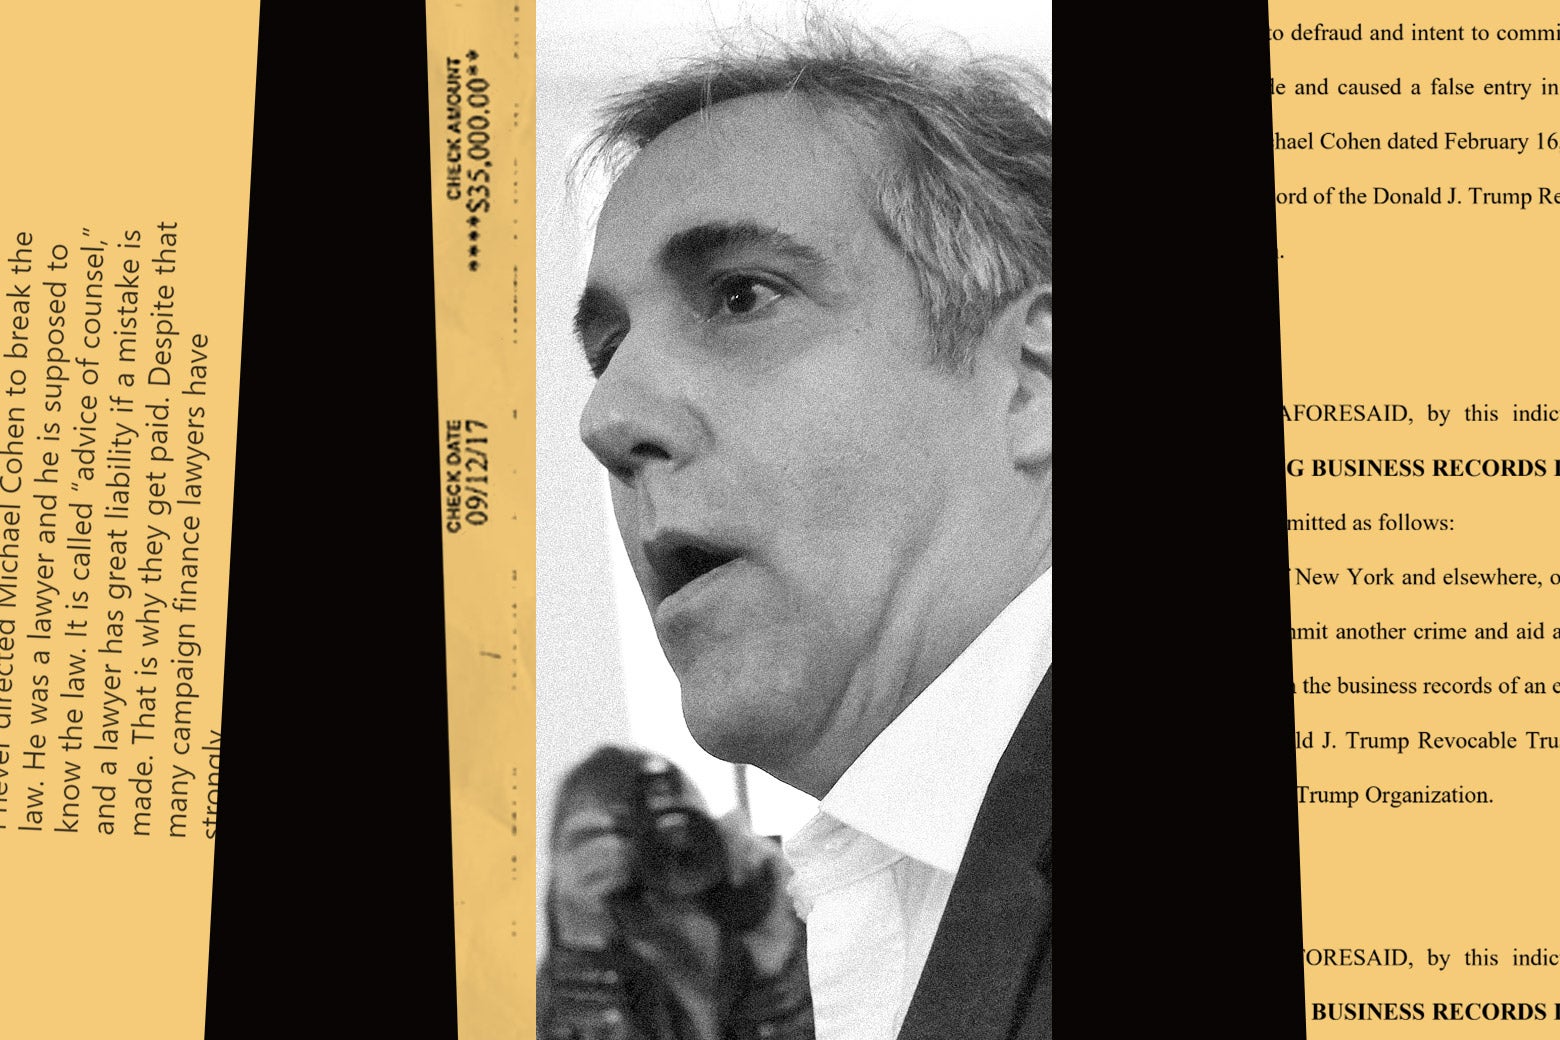 A collage featuring a black and white photo of Michael Cohen and some court documents.